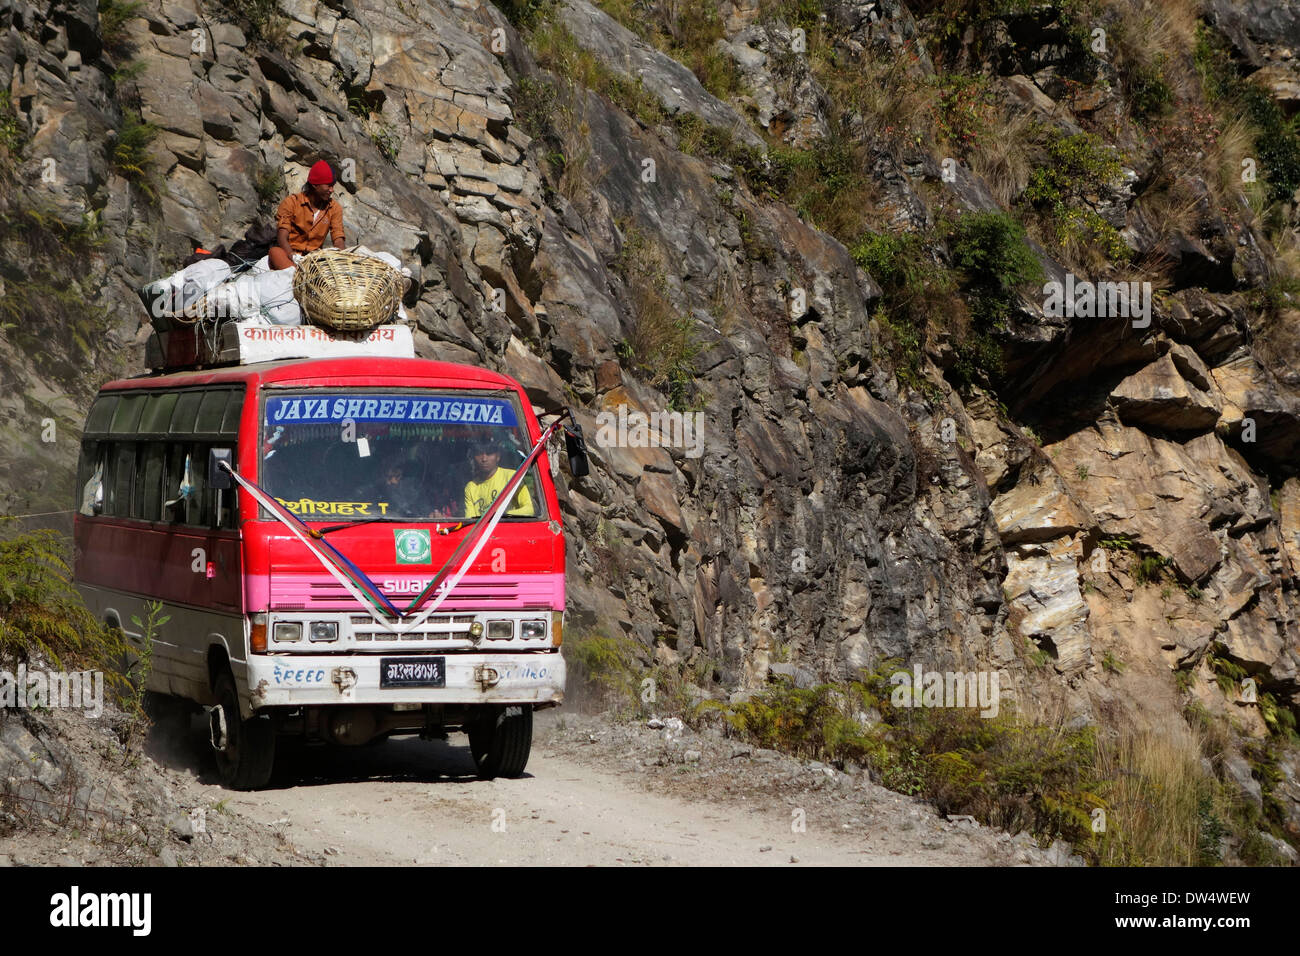 Bus with rider on top on the Annapurna road in the Gorkha region of Nepal. Stock Photo